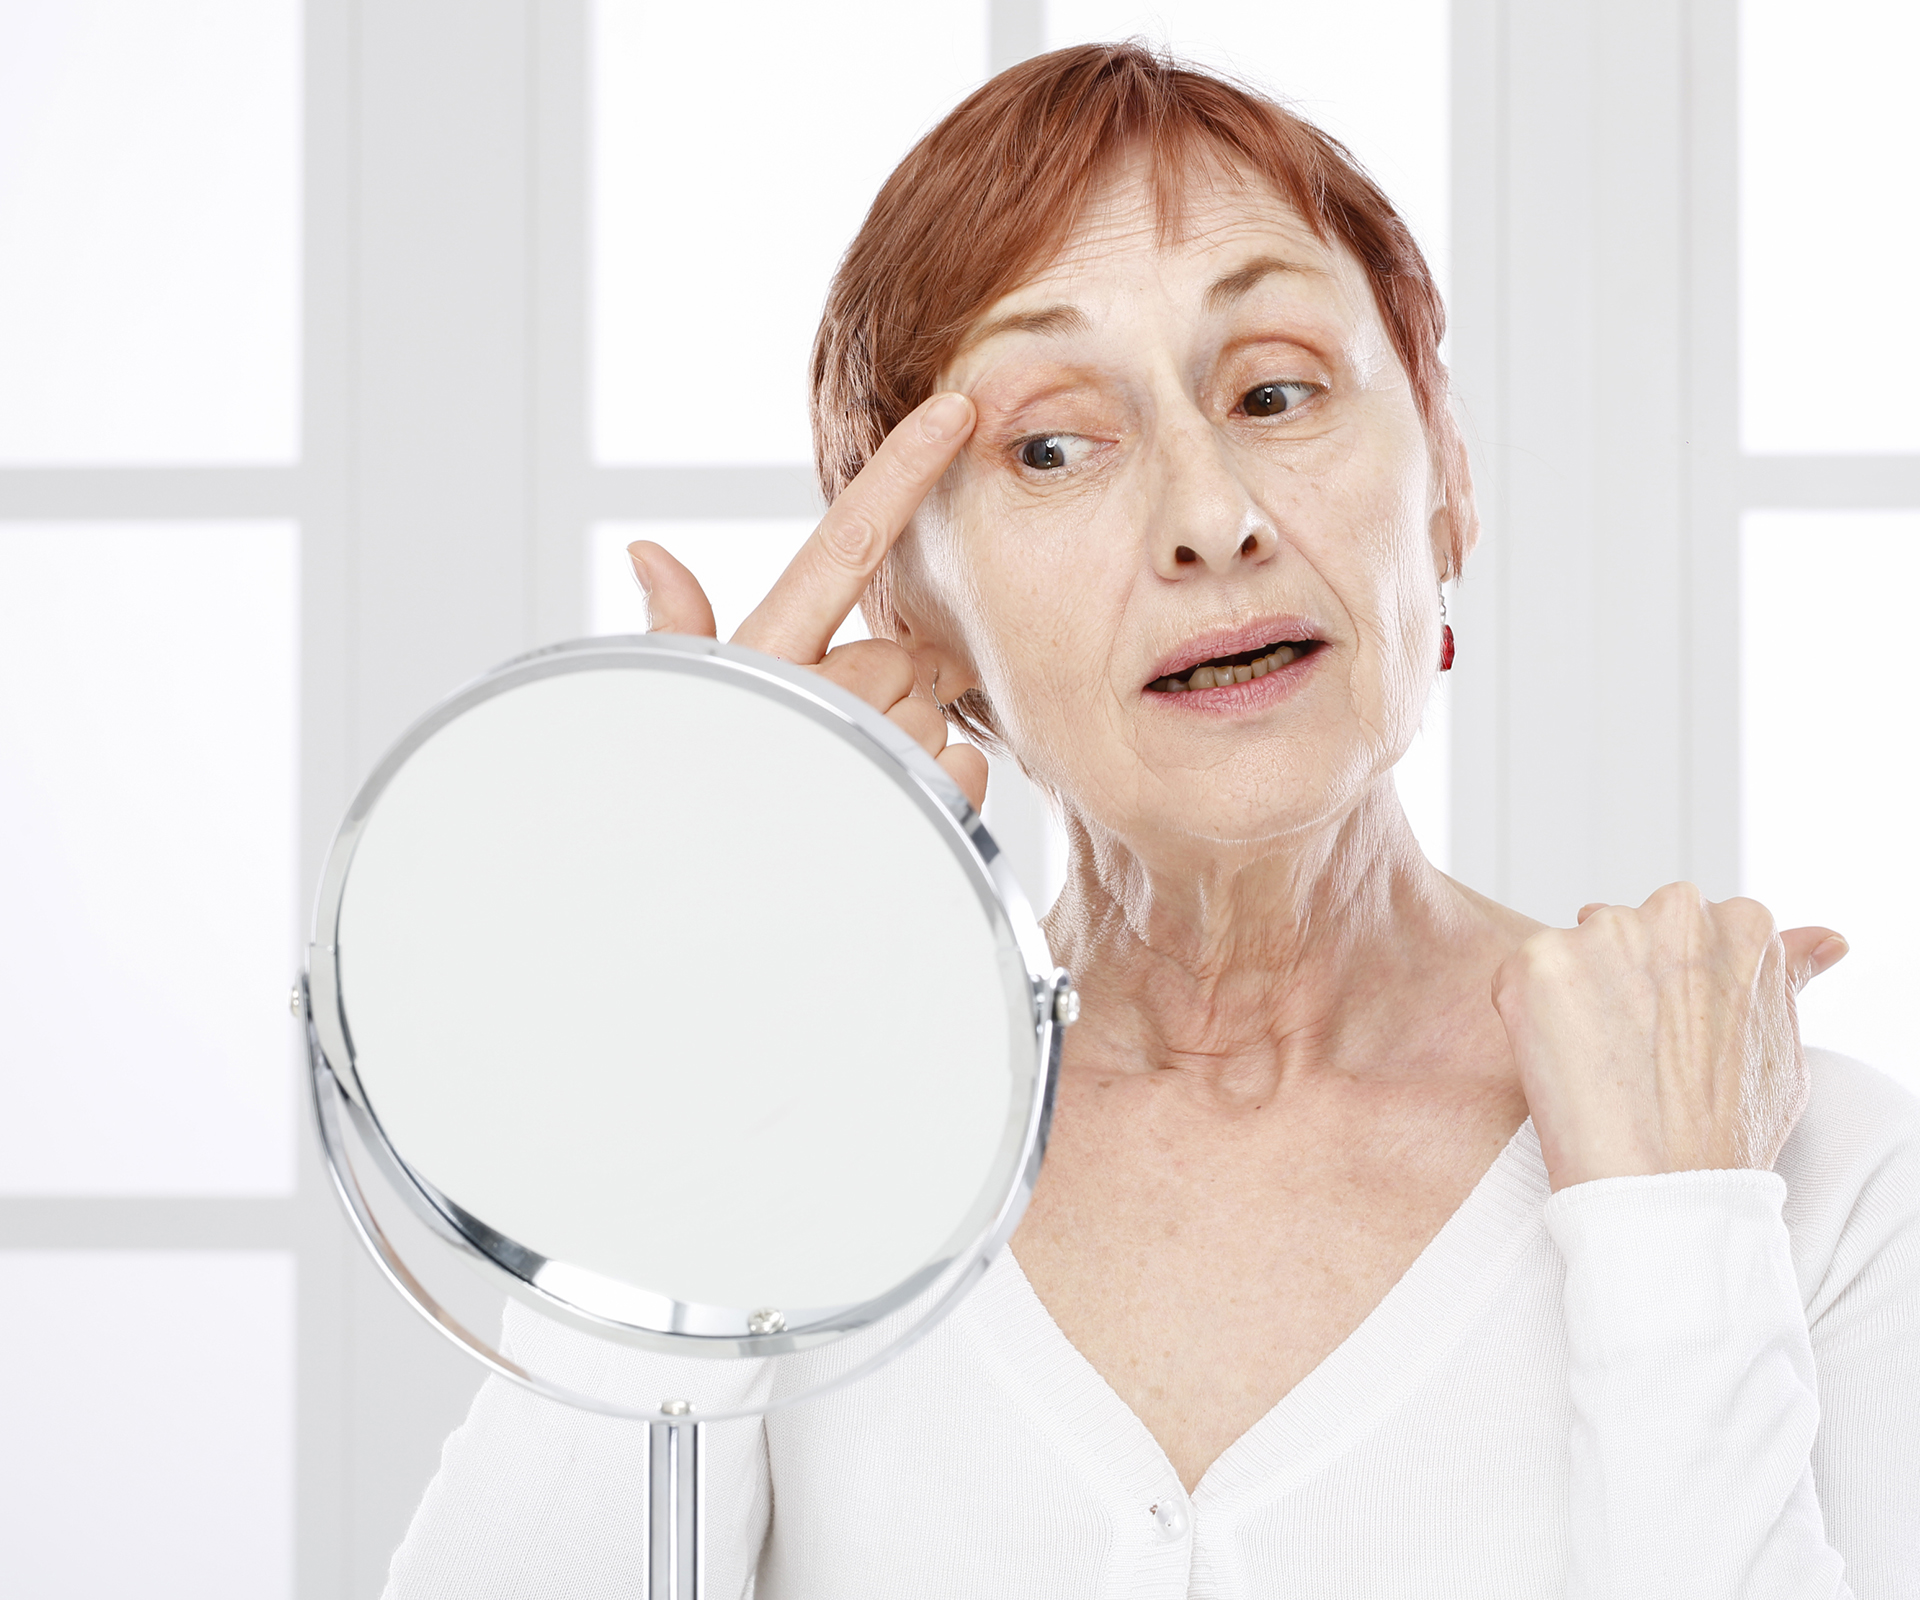 Have scientists “cured” wrinkles?